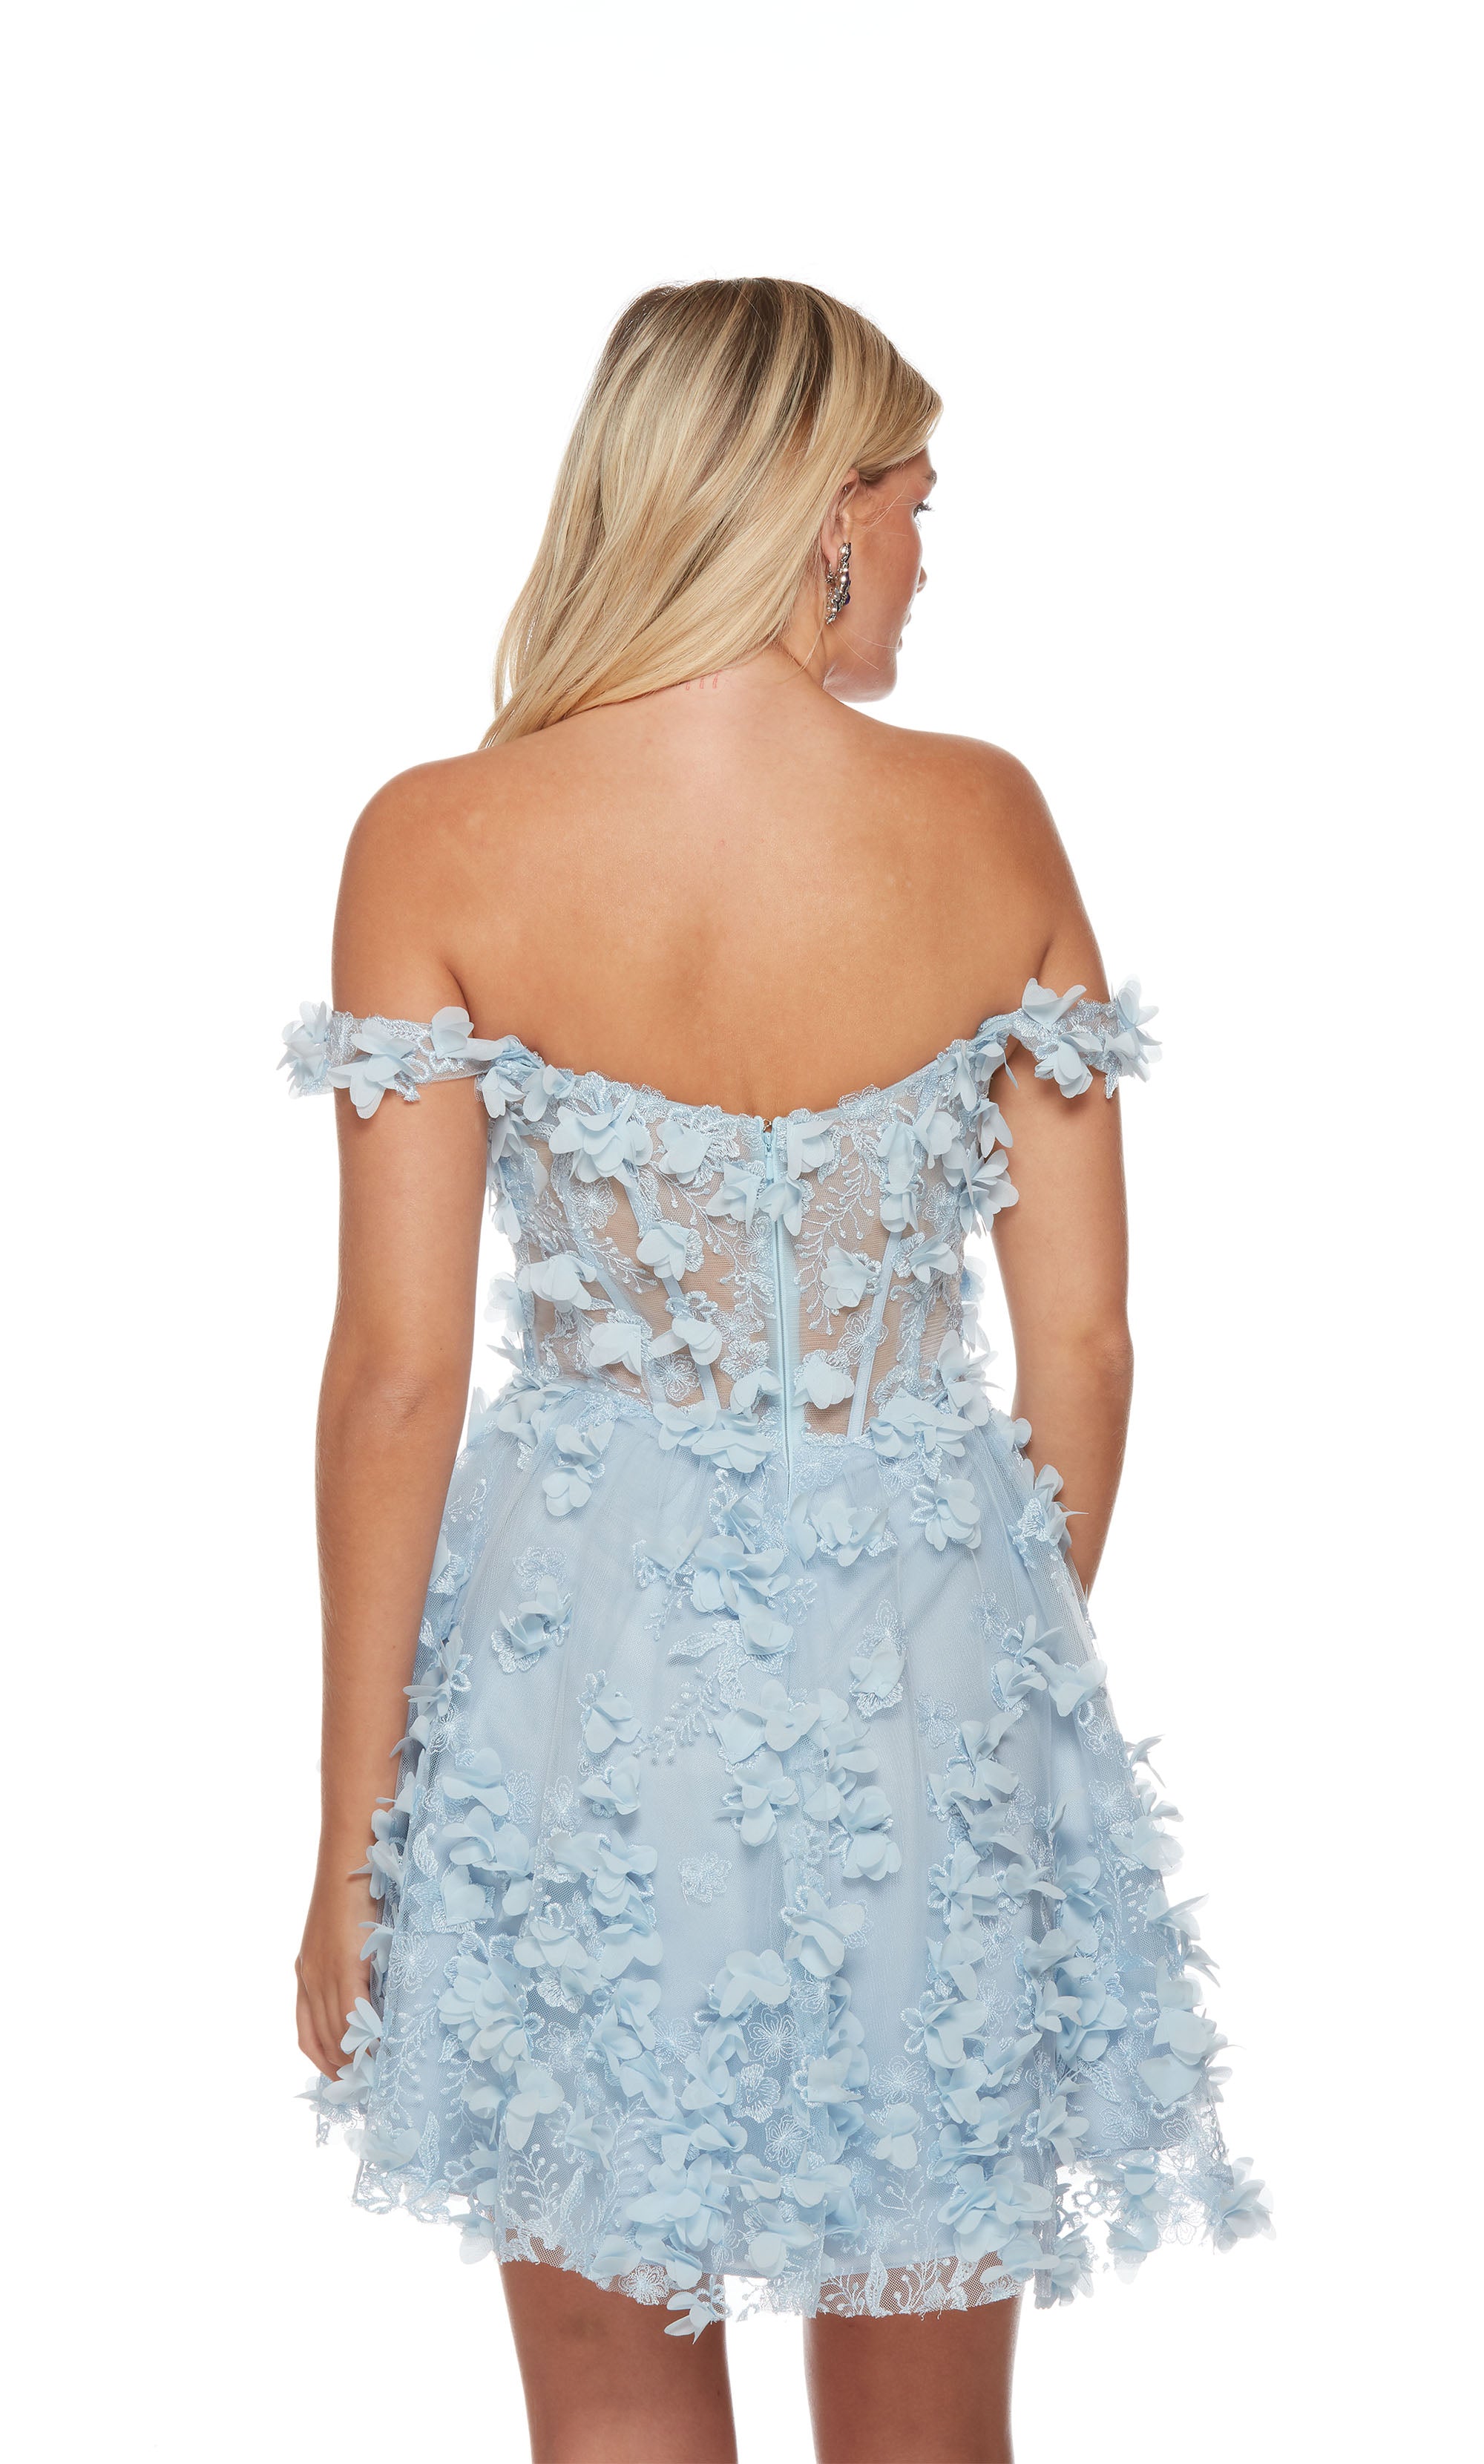 A romantic light blue off-the-shoulder short homecoming dress boasting a sheer, corset bodice adorned with delicate 3D flower appliques throughout. This dress is from our latest collection of gorgeous designer dresses by ALYCE Paris.